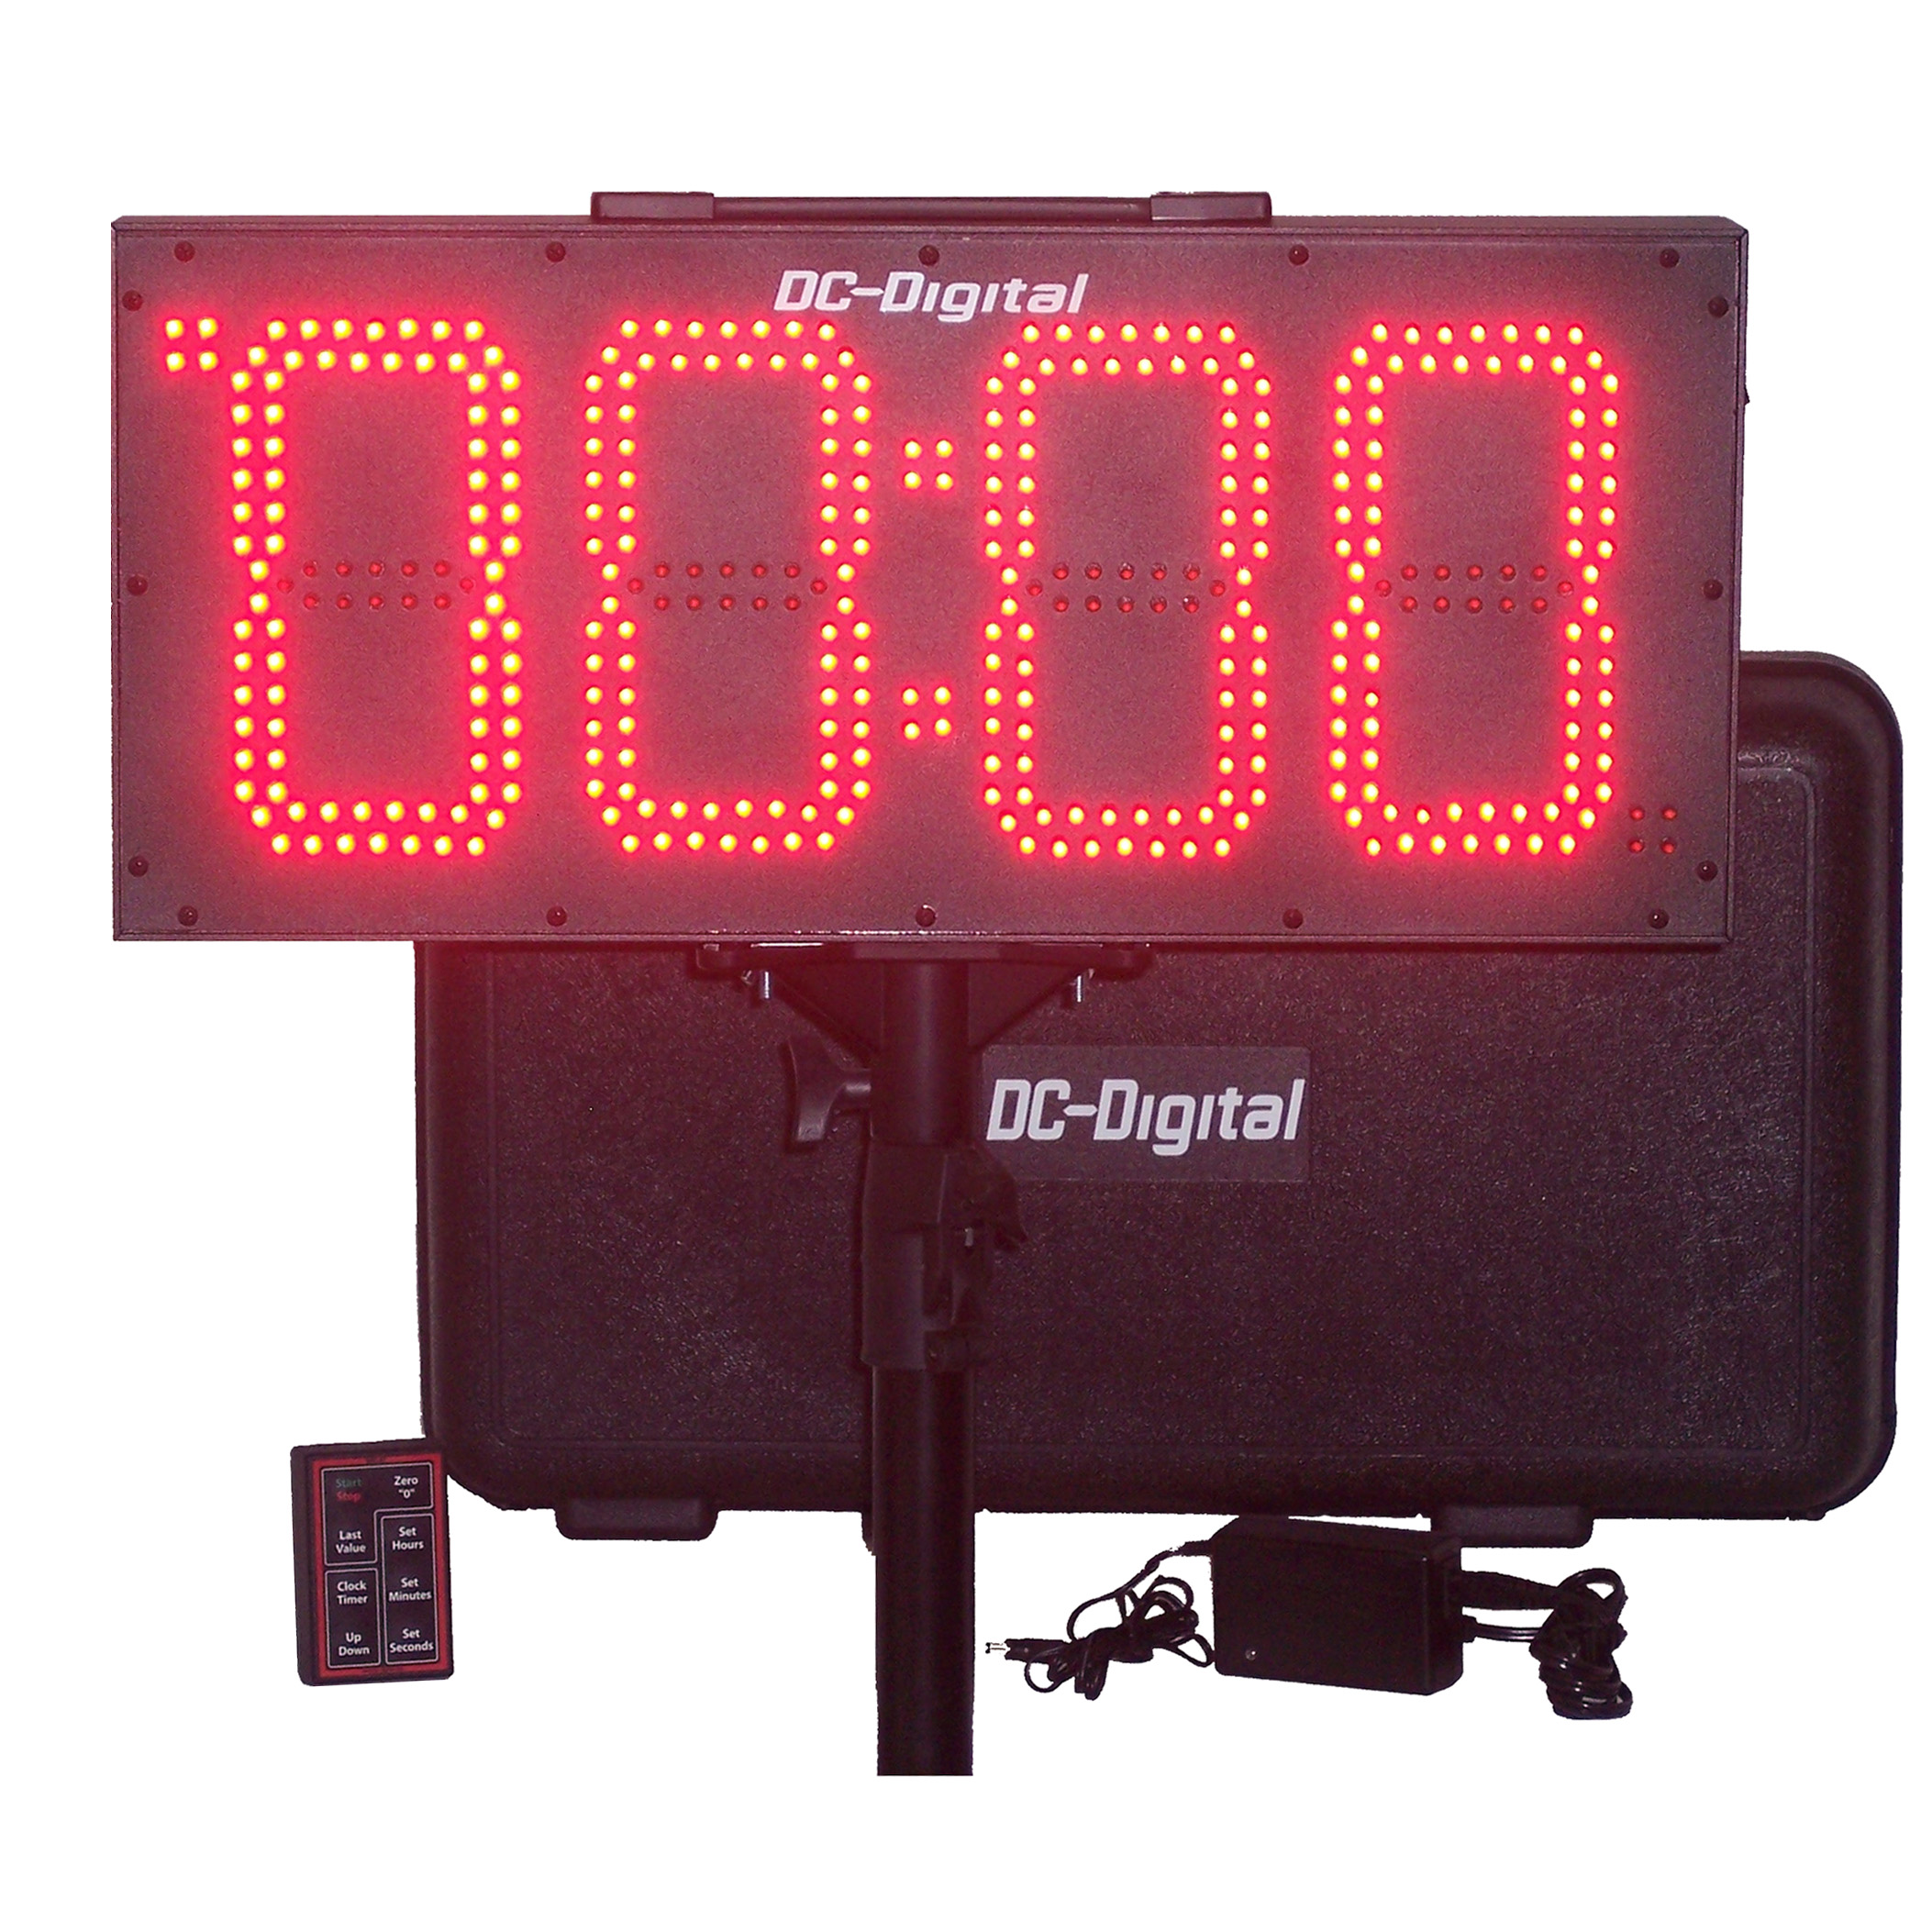 (DC-80UTW-BTC) Portable 8.0 Inch LED Digit, Multi-Function, Multipurpose Sport (Counts Up, Counts Down and Time of Day Clock), Battery Operated, Digital Timer-Clock with RF-Wireless Handheld Remote Controller, Carrying handle, Carrying Case, Tripod with Mount and Battery Charger (INDOOR/OUTDOOR)